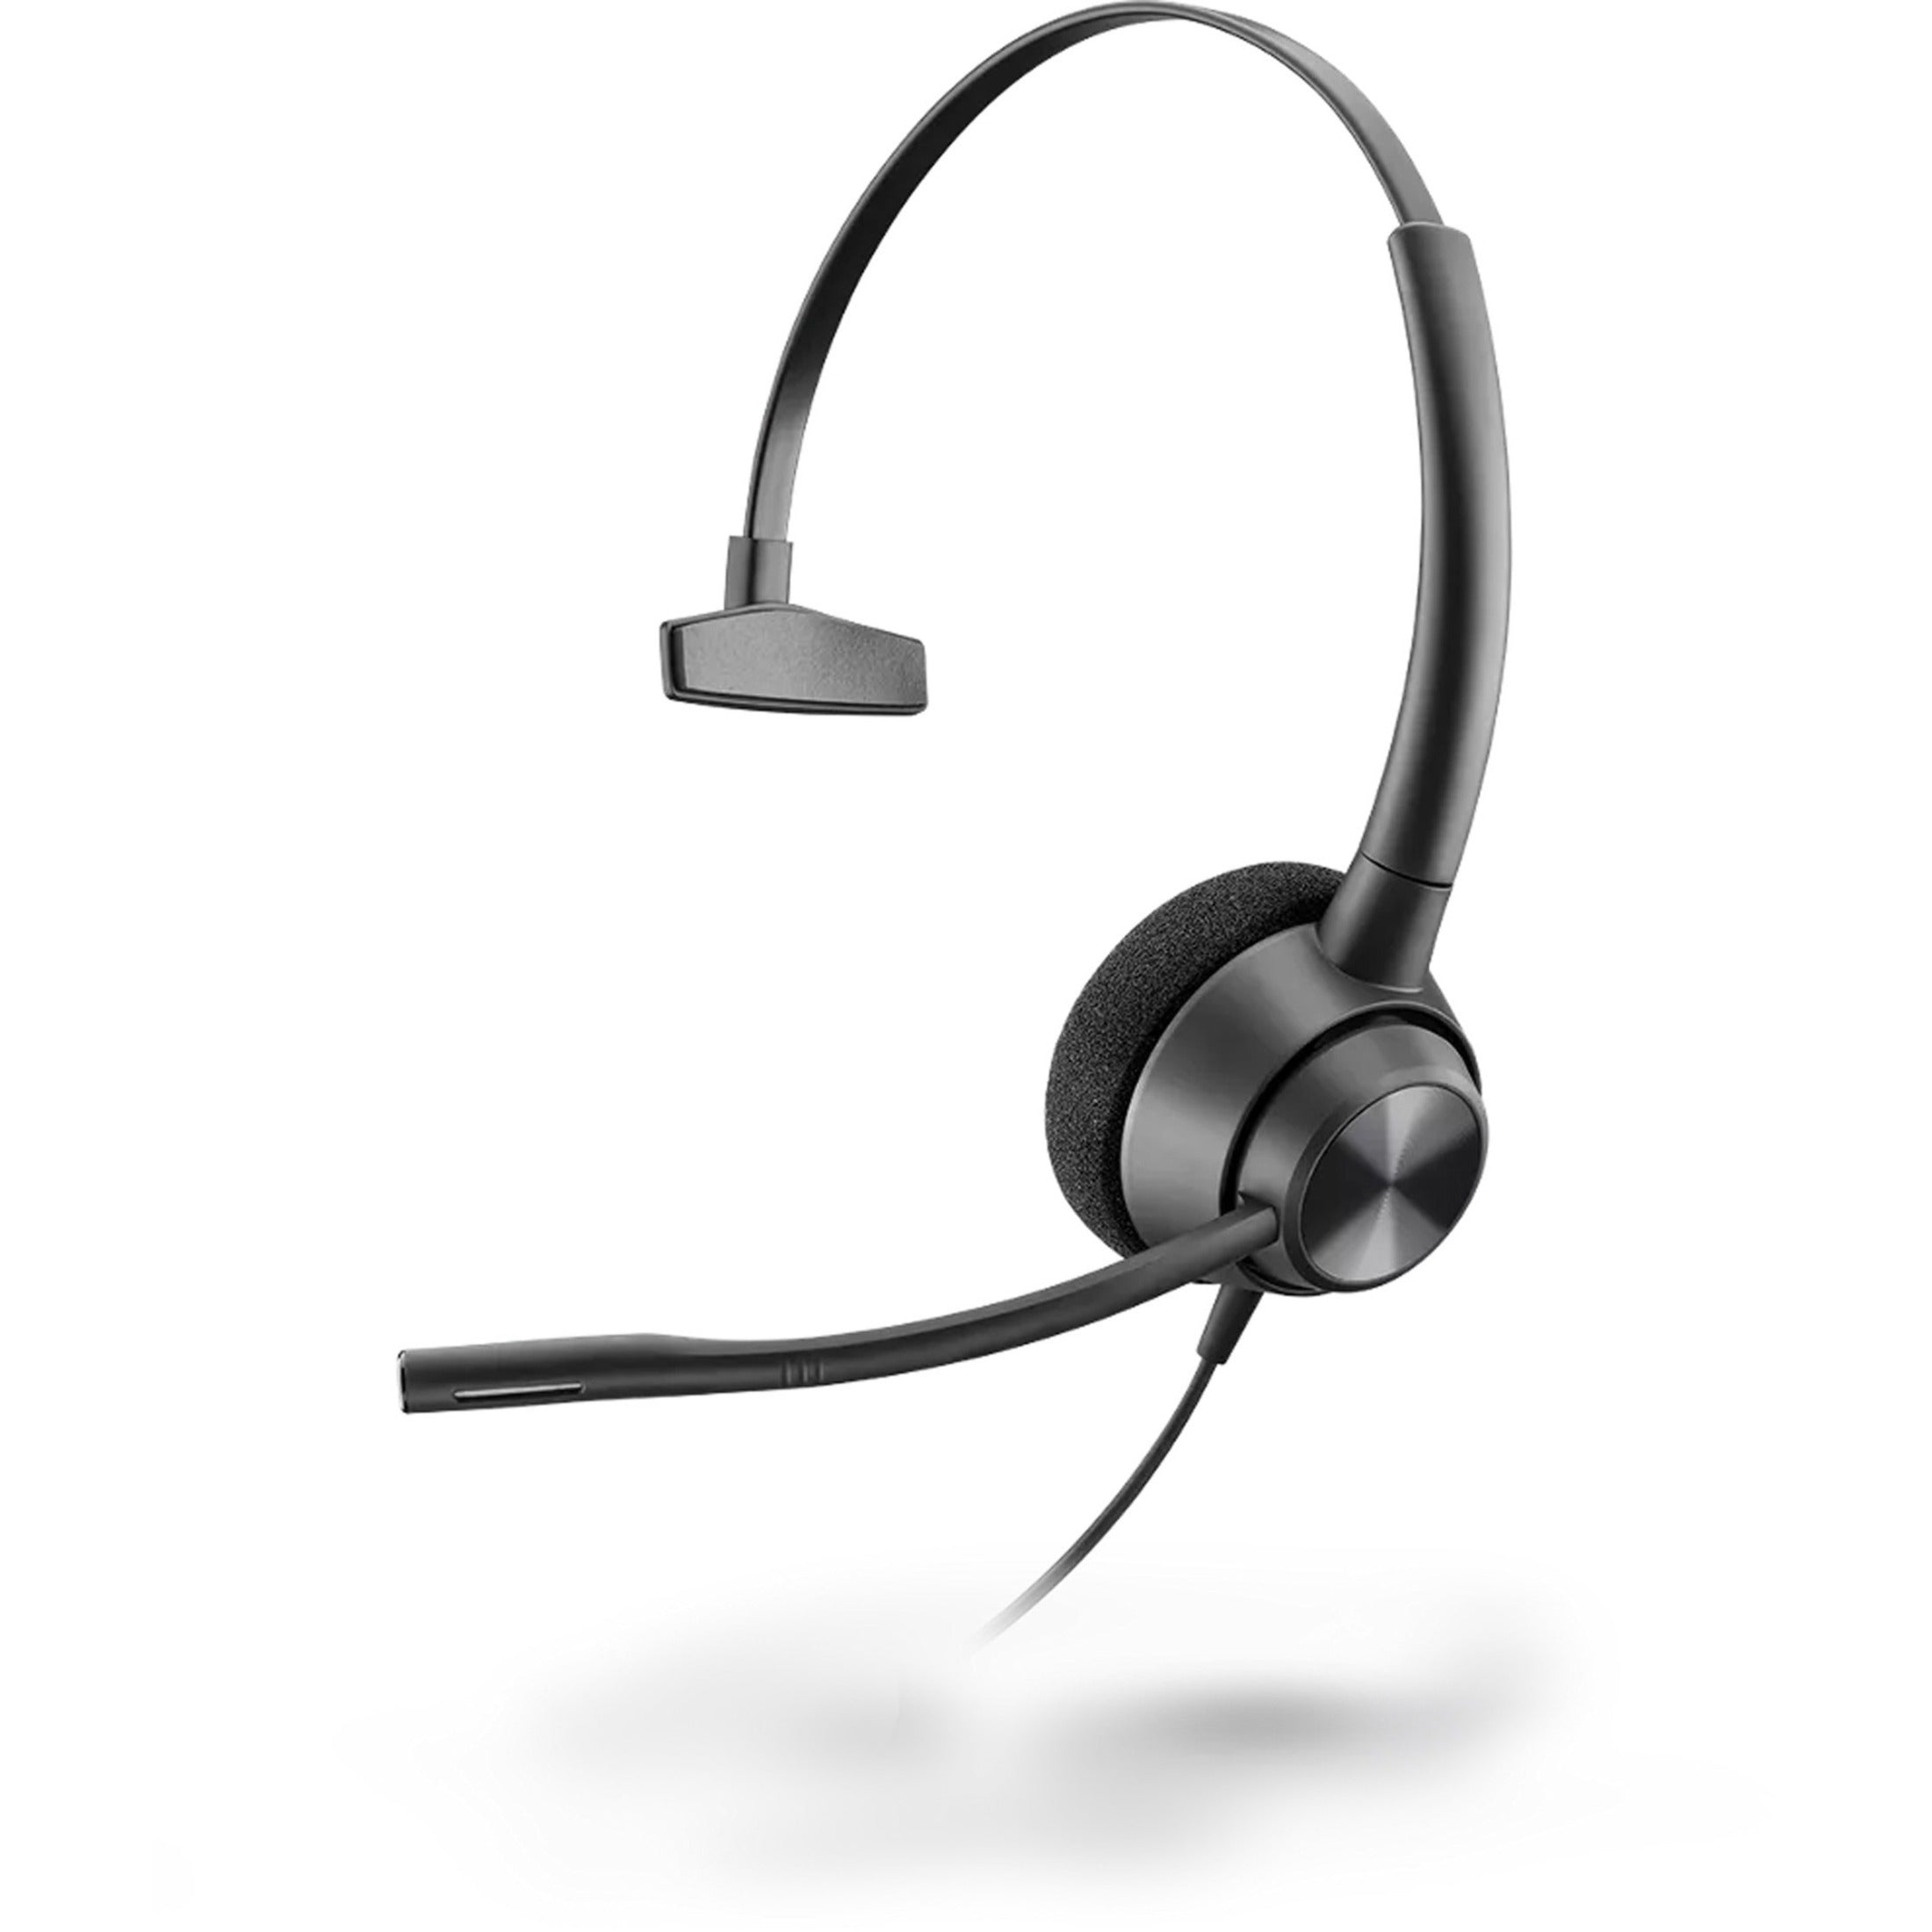 Plantronics 214572-01 EncorePro 300 Series Headset, Monaural Over-the-head, Noise Cancelling, Quick Disconnect